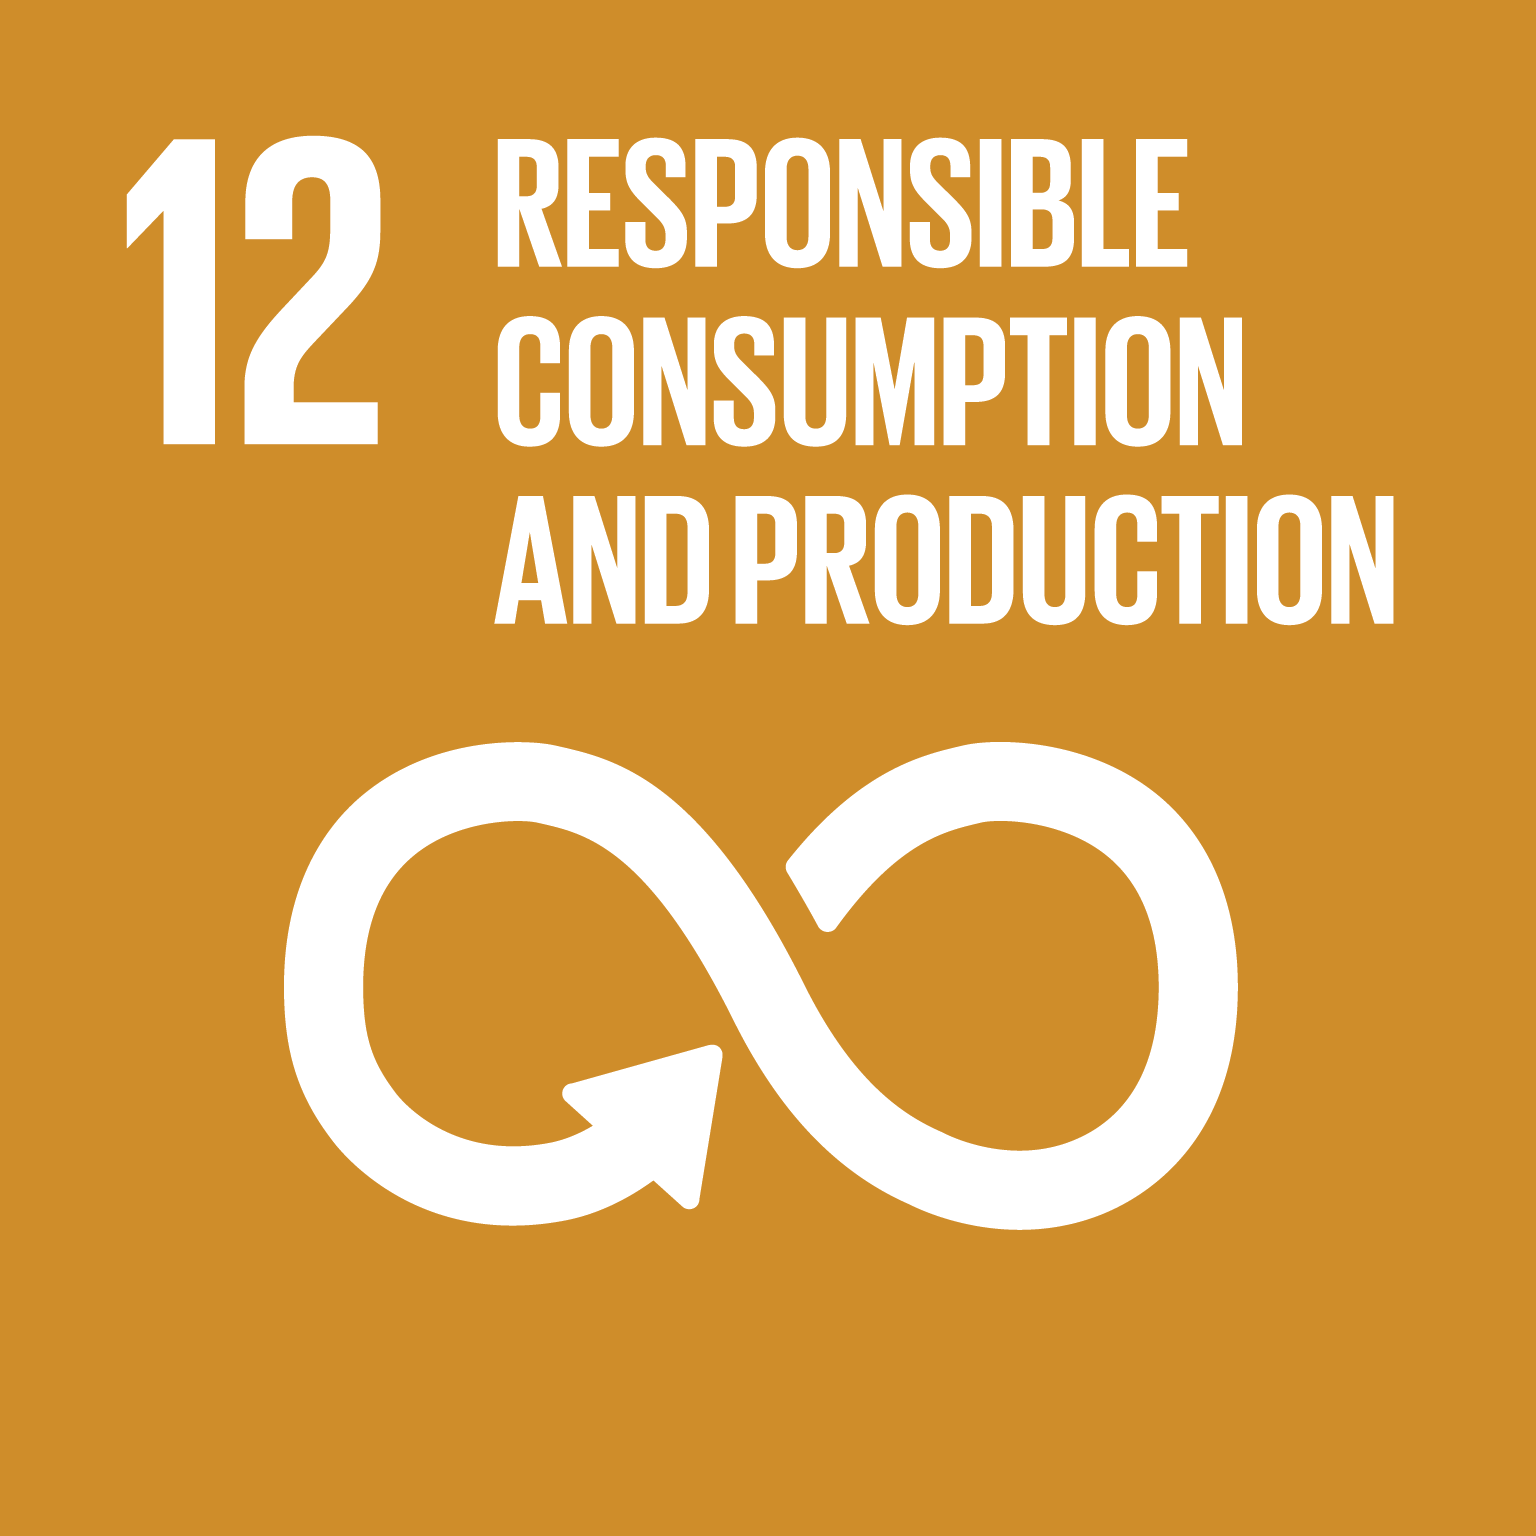 SDG responsible consumption and production.png